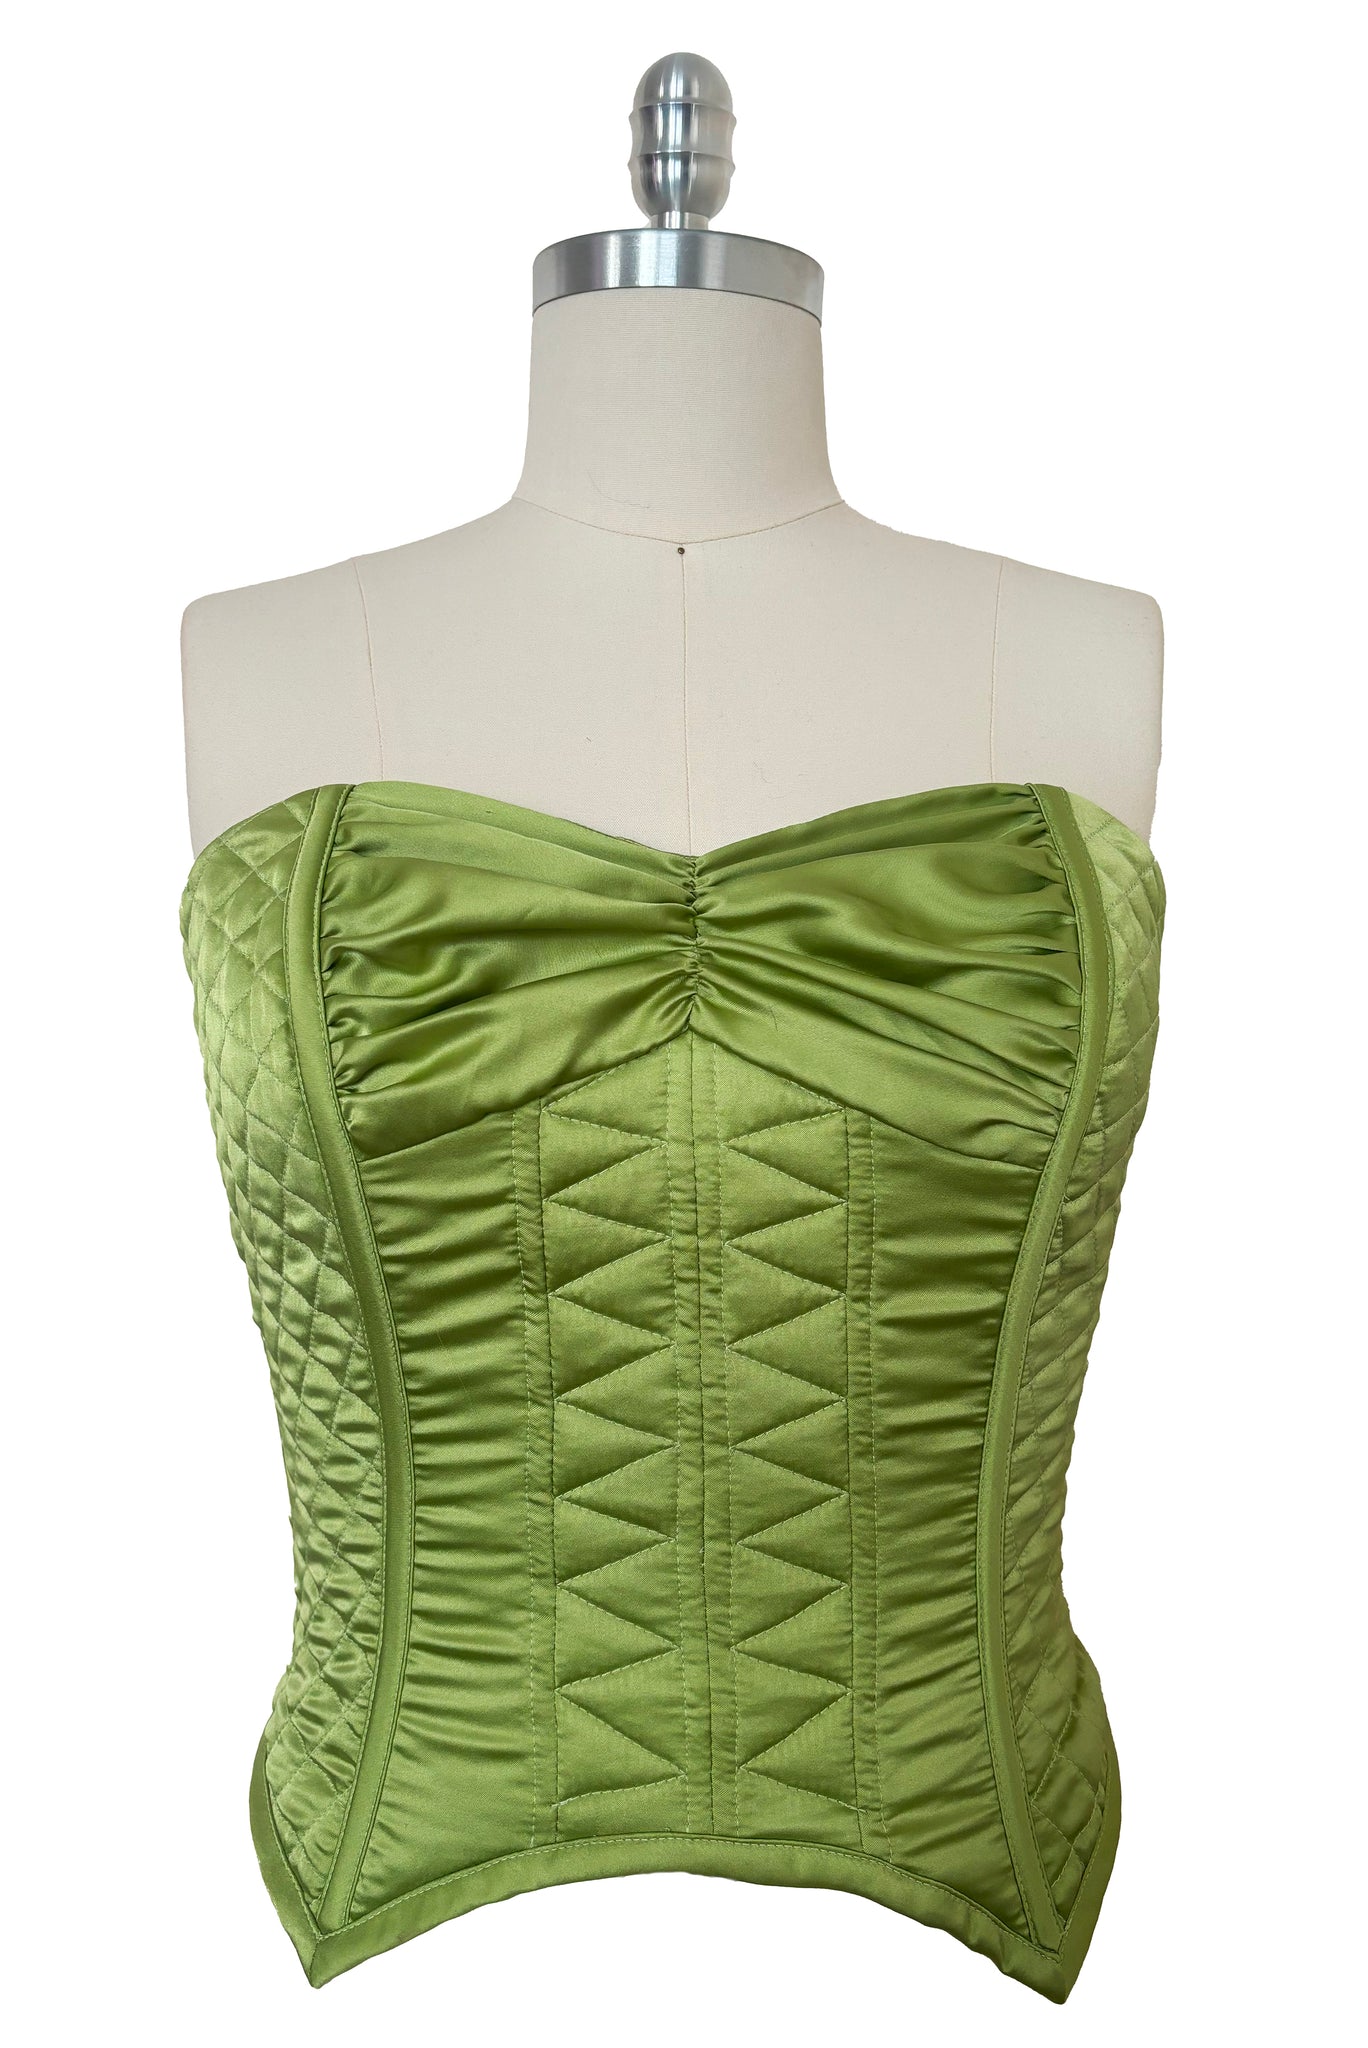 1990s NWT Vintage Peridot Green Quilted Satin Corset by John Festa, Small to Medium